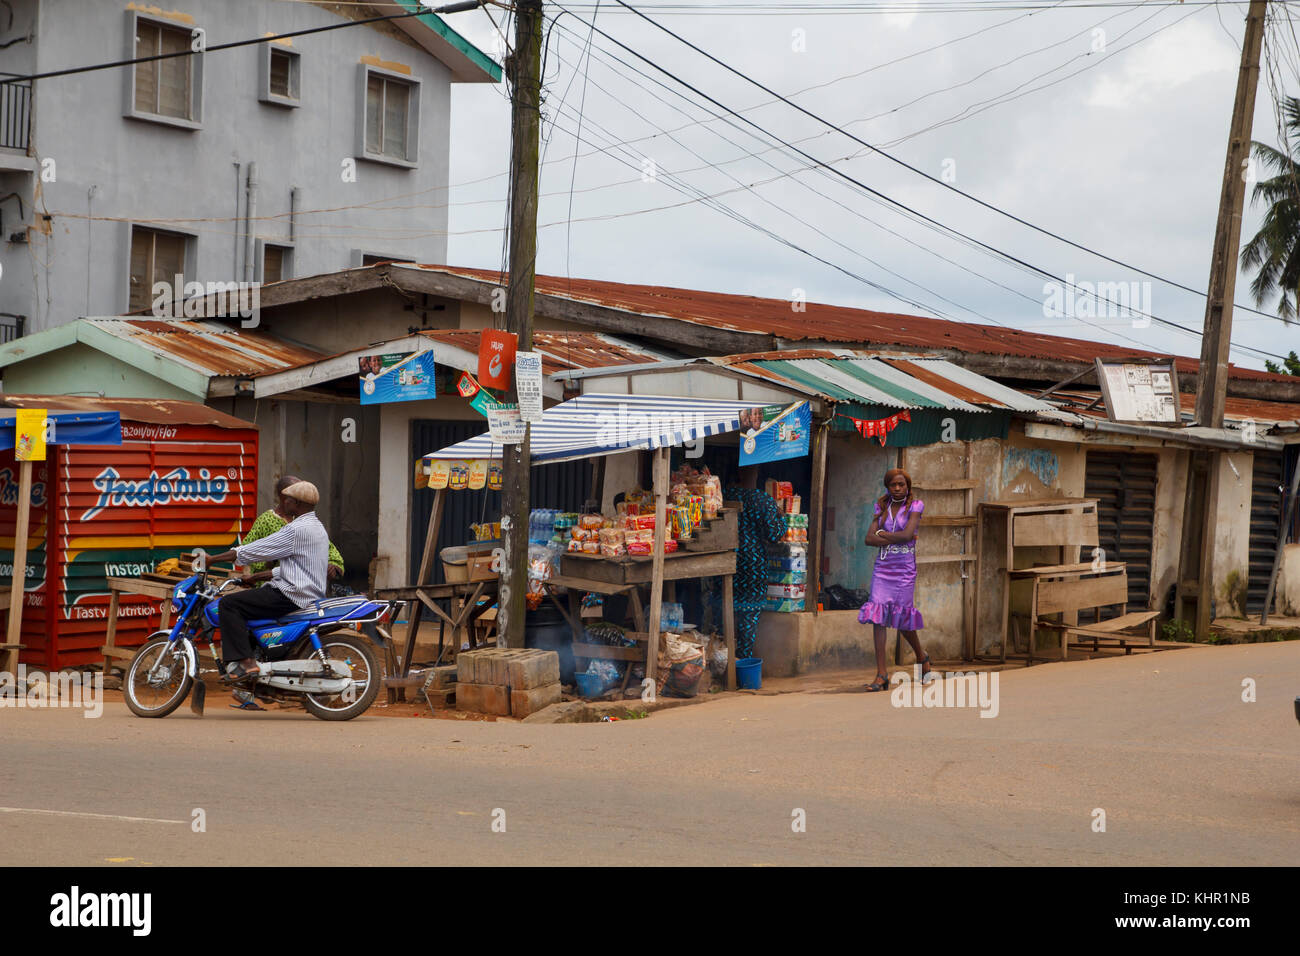 Nigerian men and woman in the street in the city of Akure in Ondo state, Nigeria Stock Photo